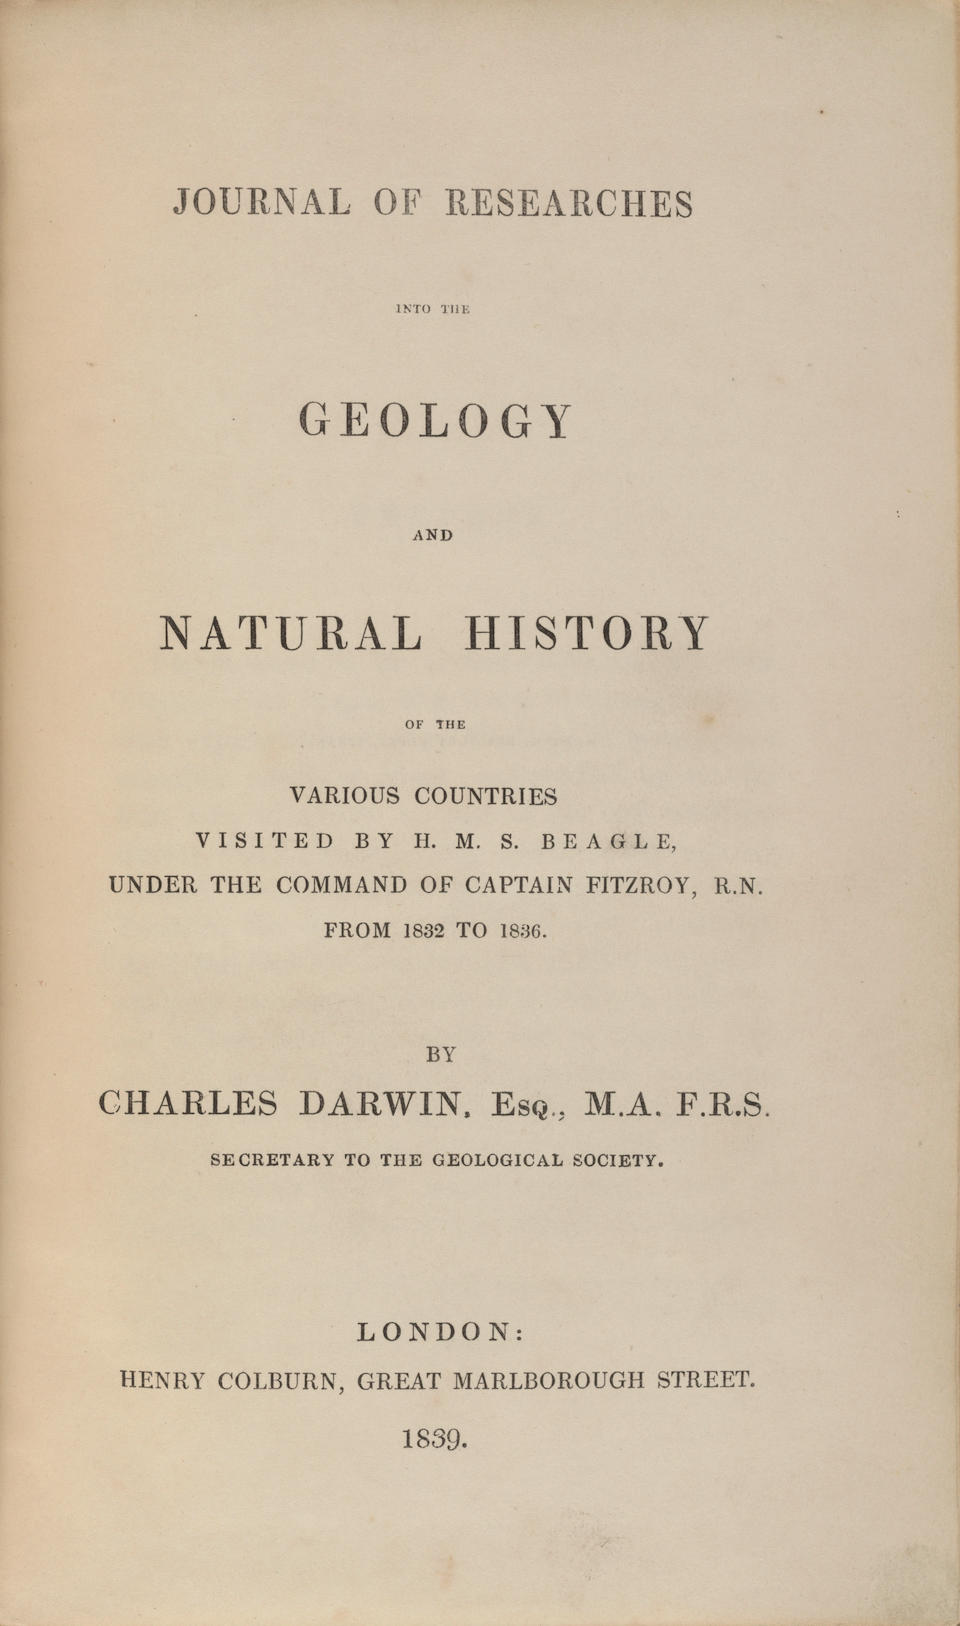 DARWIN'S FIRST BOOK. DARWIN, CHARLES. 1809-1882. Journal of Researches into the Geology and Natu... - Image 3 of 3